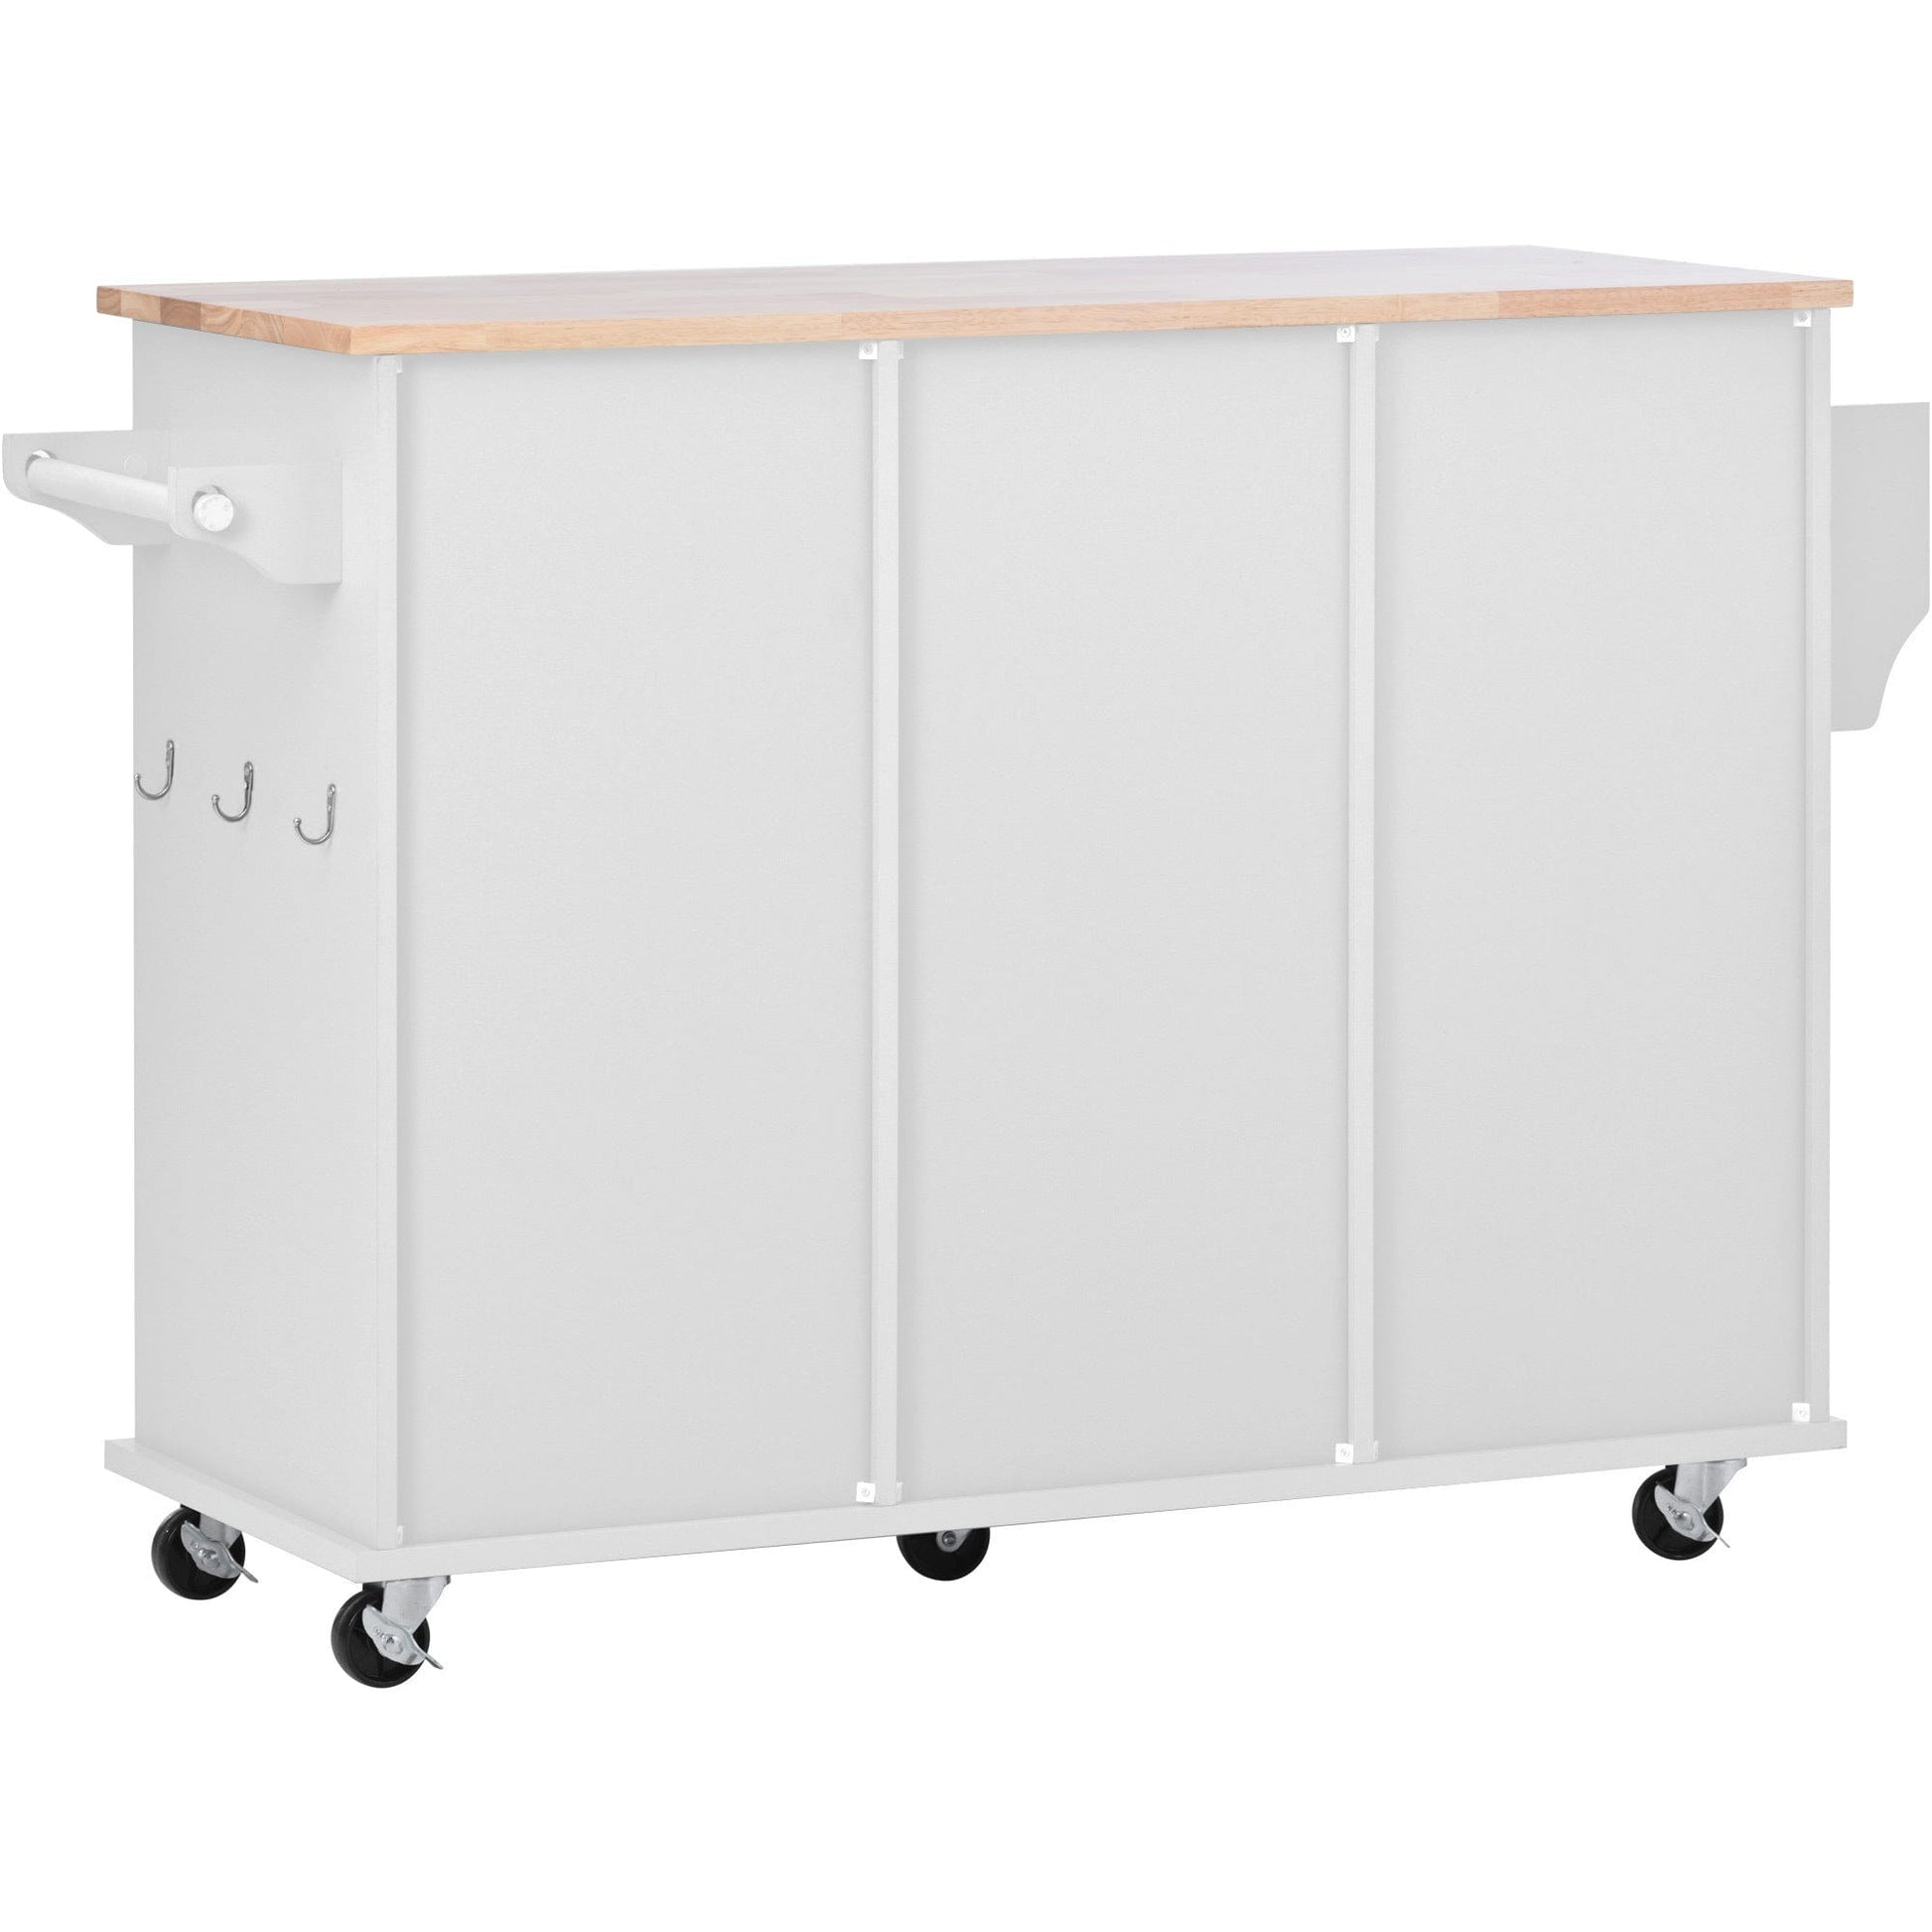 1st Choice Furniture Direct Kitchen Island Cart 1st Choice Functional Stylish Kitchen Island Cart with Storage Solution